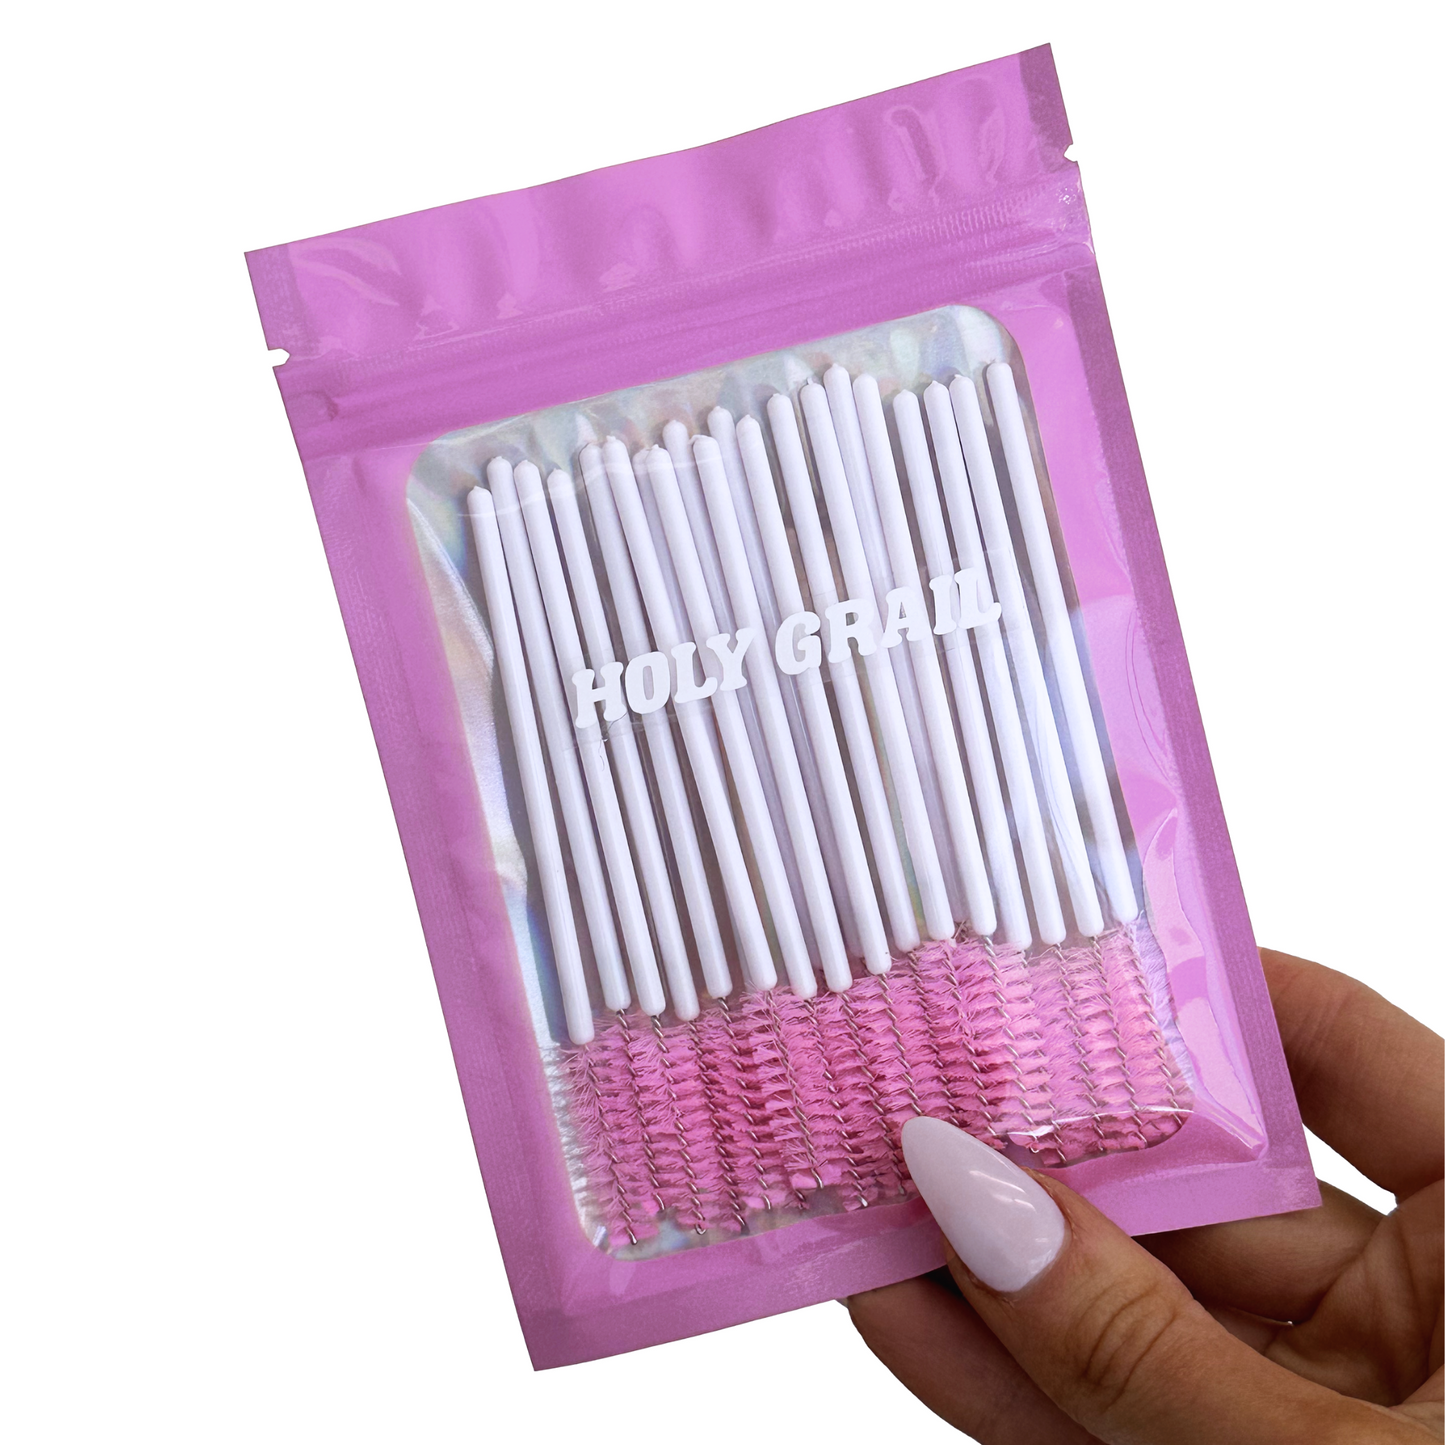 Lash Spoolies 20 Pack (Pink and White)